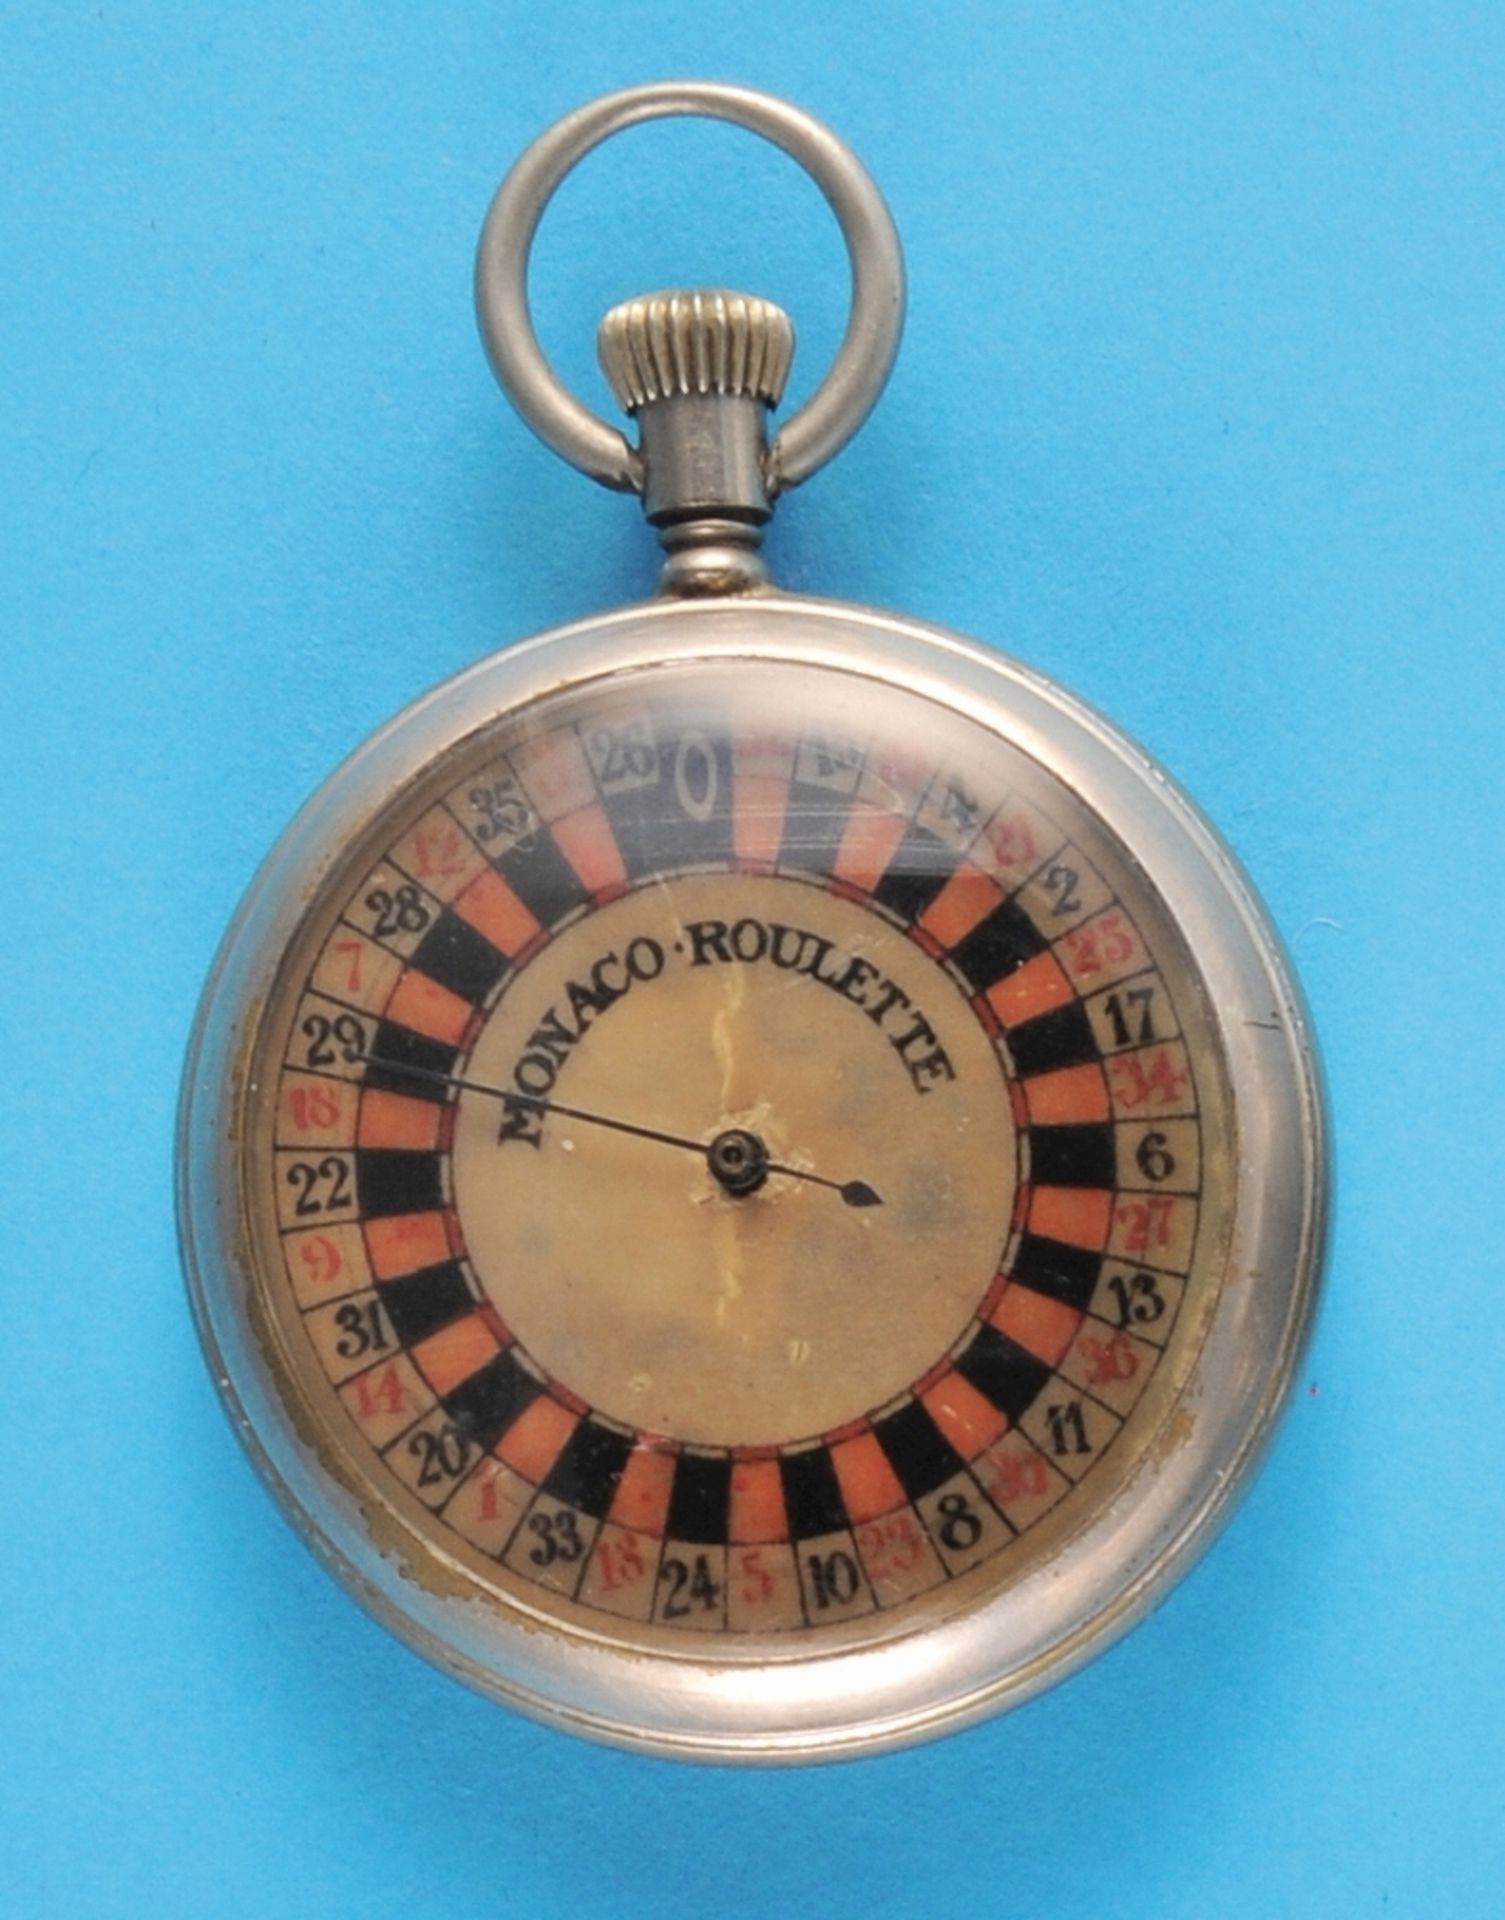 Monaco-Roulette Dèposé, in a nickel pocket watch case, dial with red/black roulette numbers